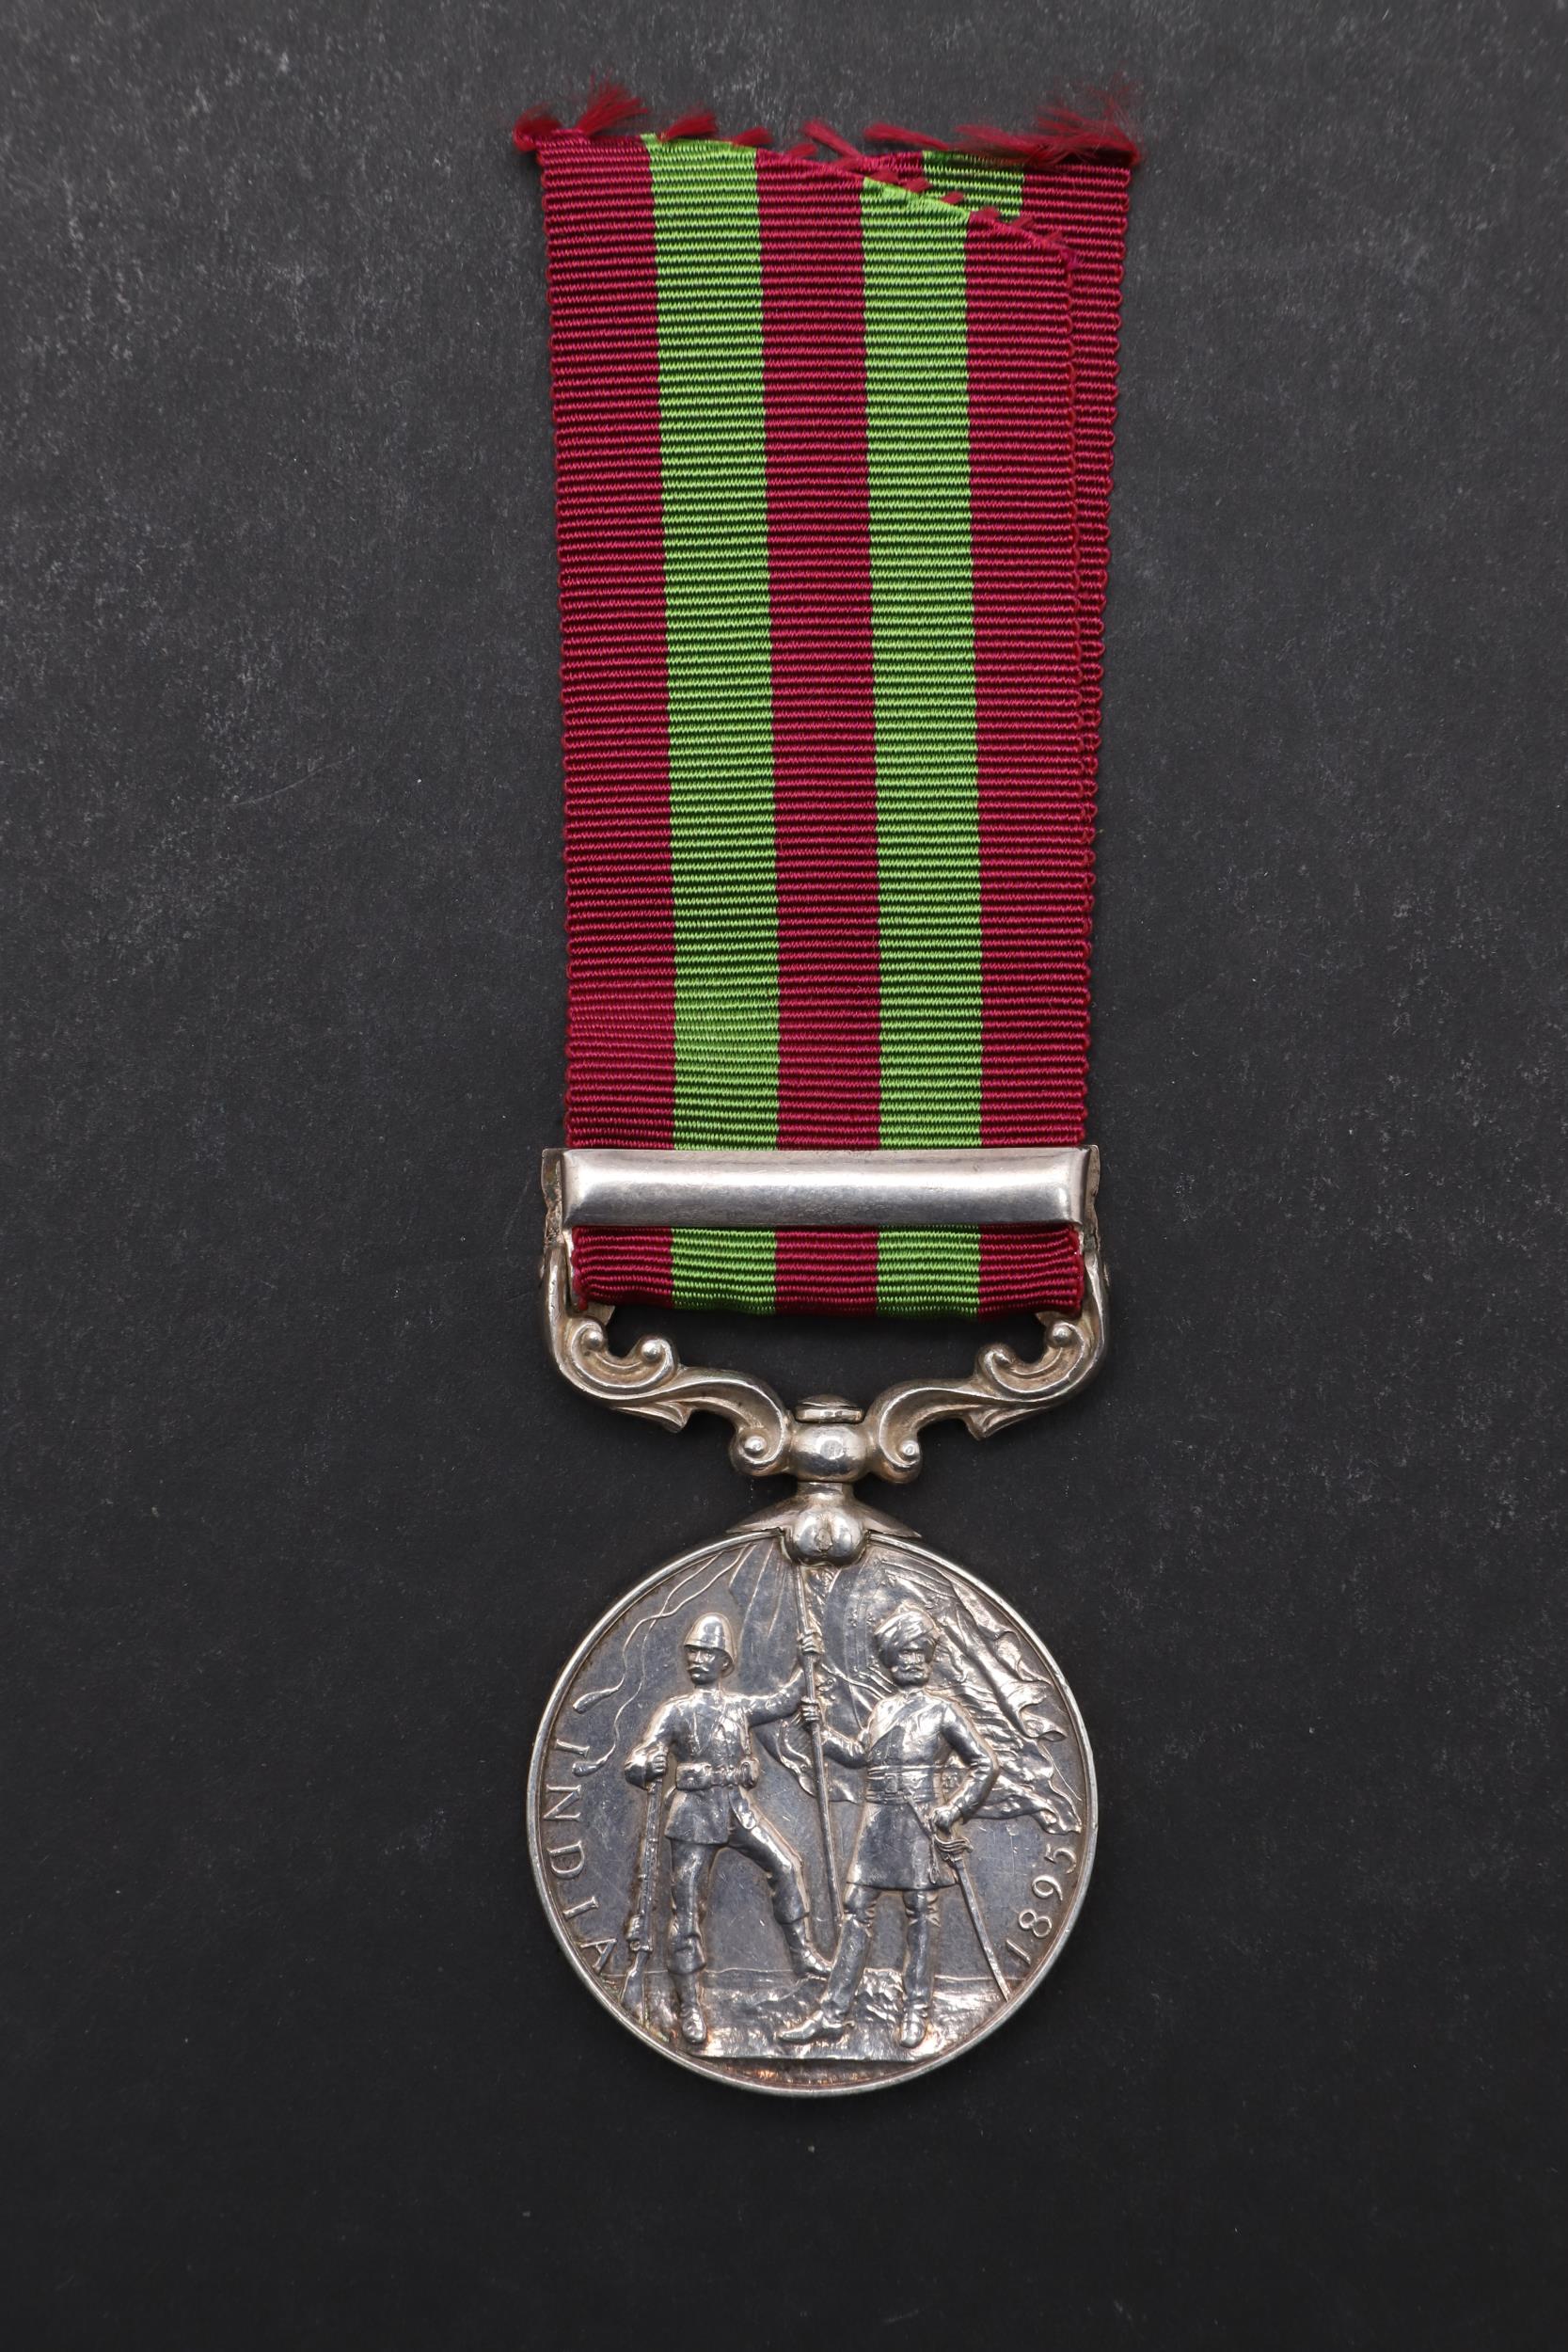 A VICTORIAN INDIA MEDAL 1896 TO THE EATS LANCS REGT. - Image 3 of 6